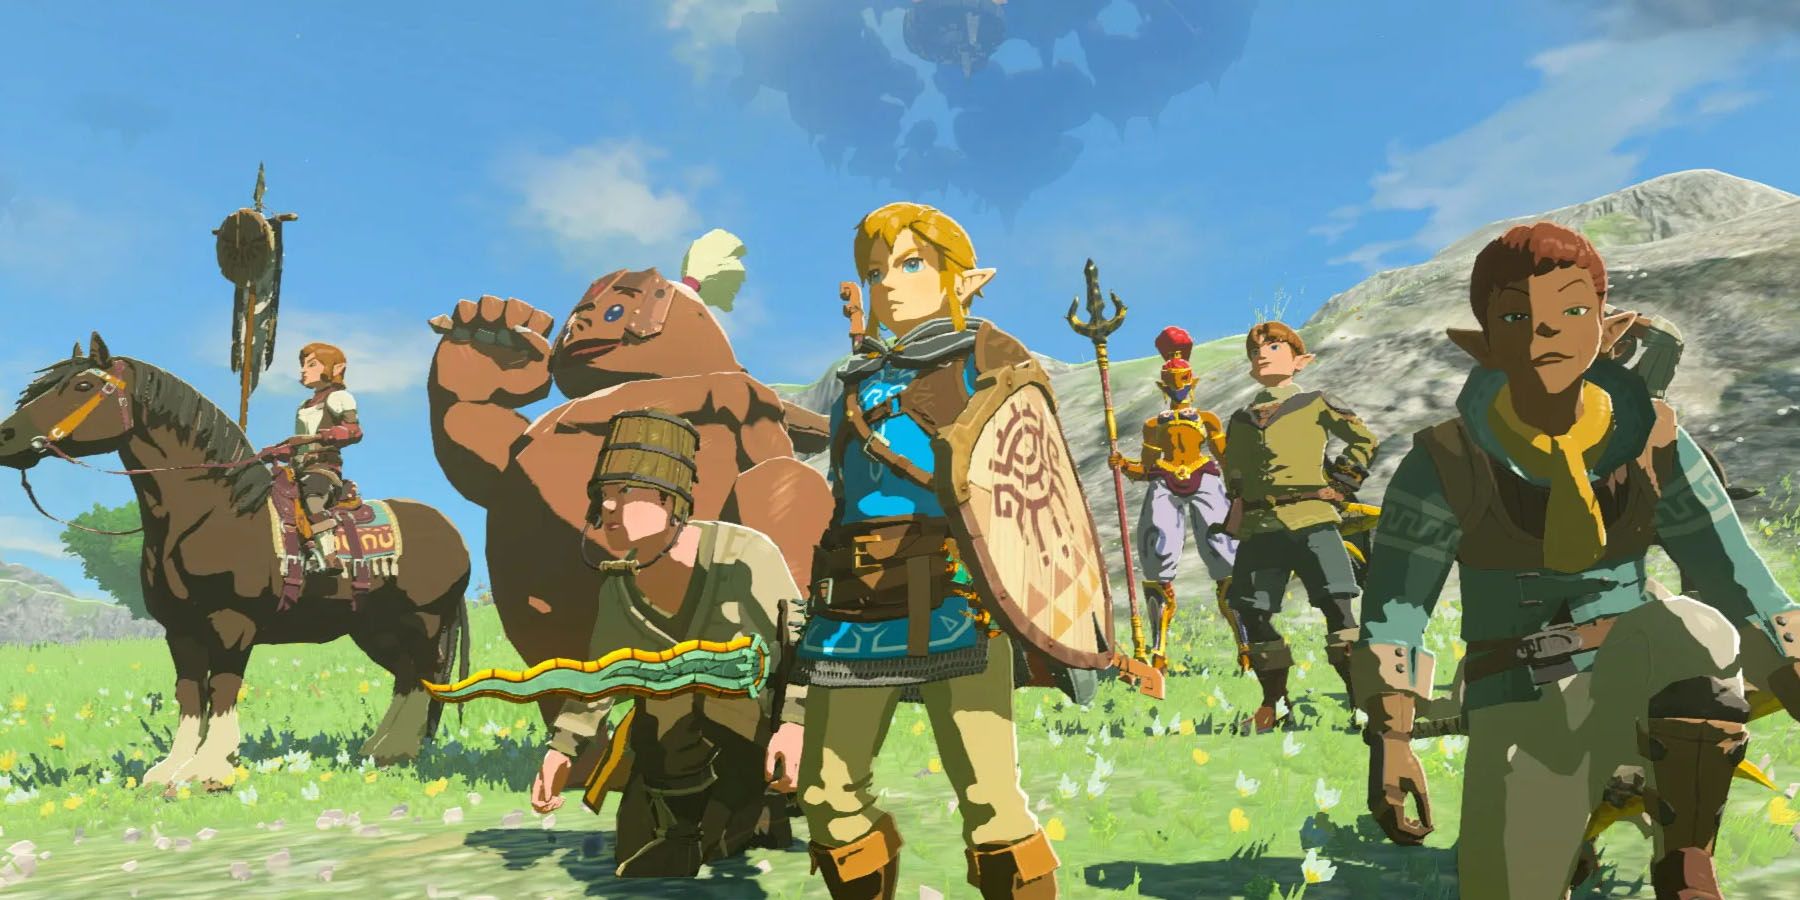 A screenshot of Link and his friends standing in a grassy field in The Legend of Zelda: Tears of the Kingdom.